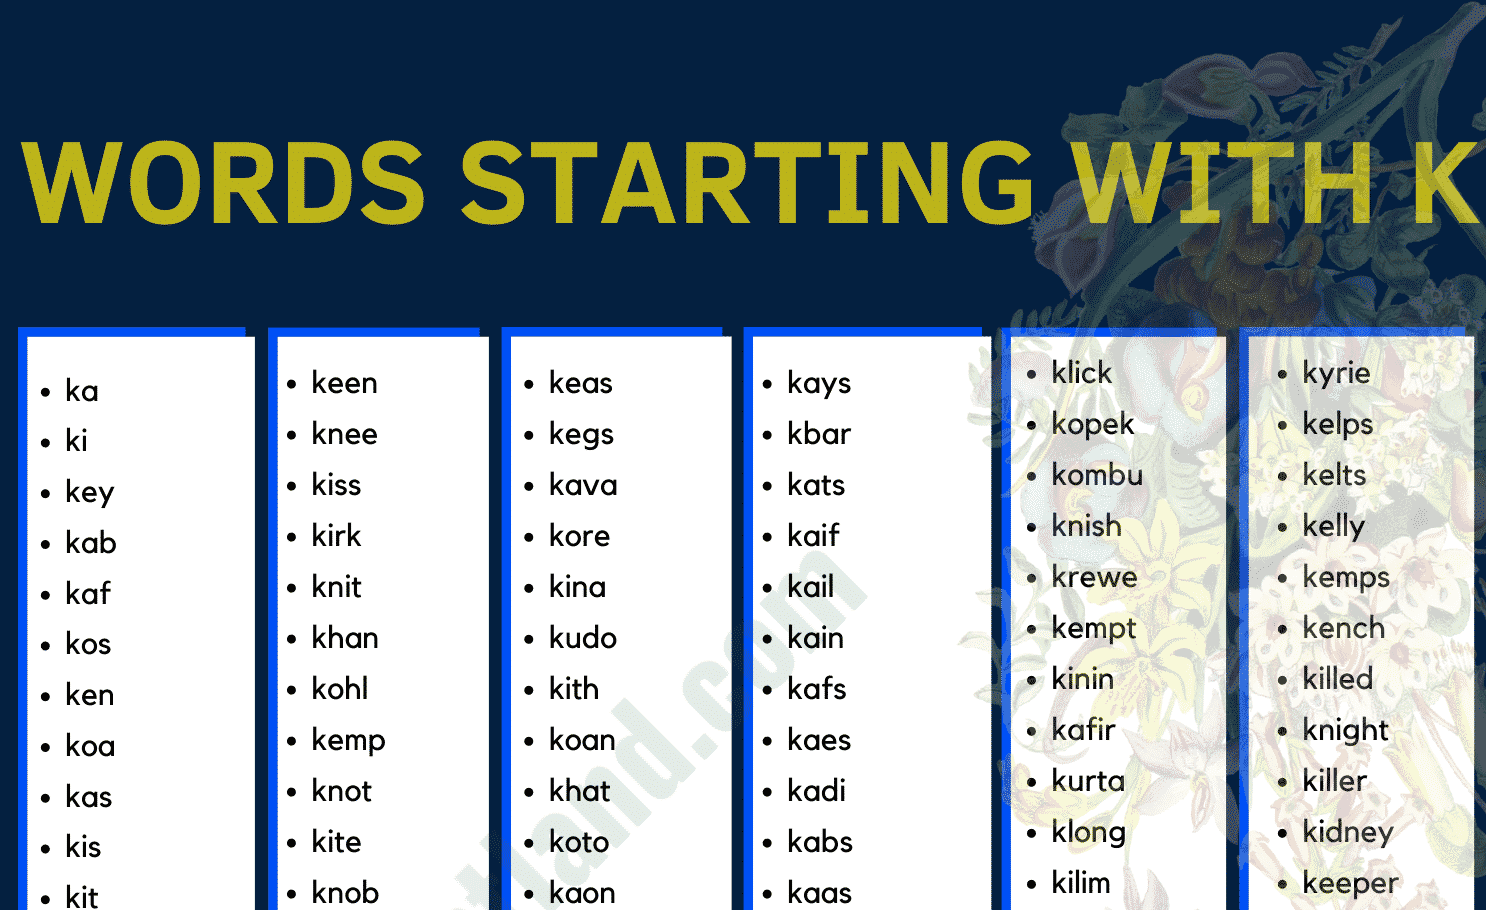 Words That Start With Kin